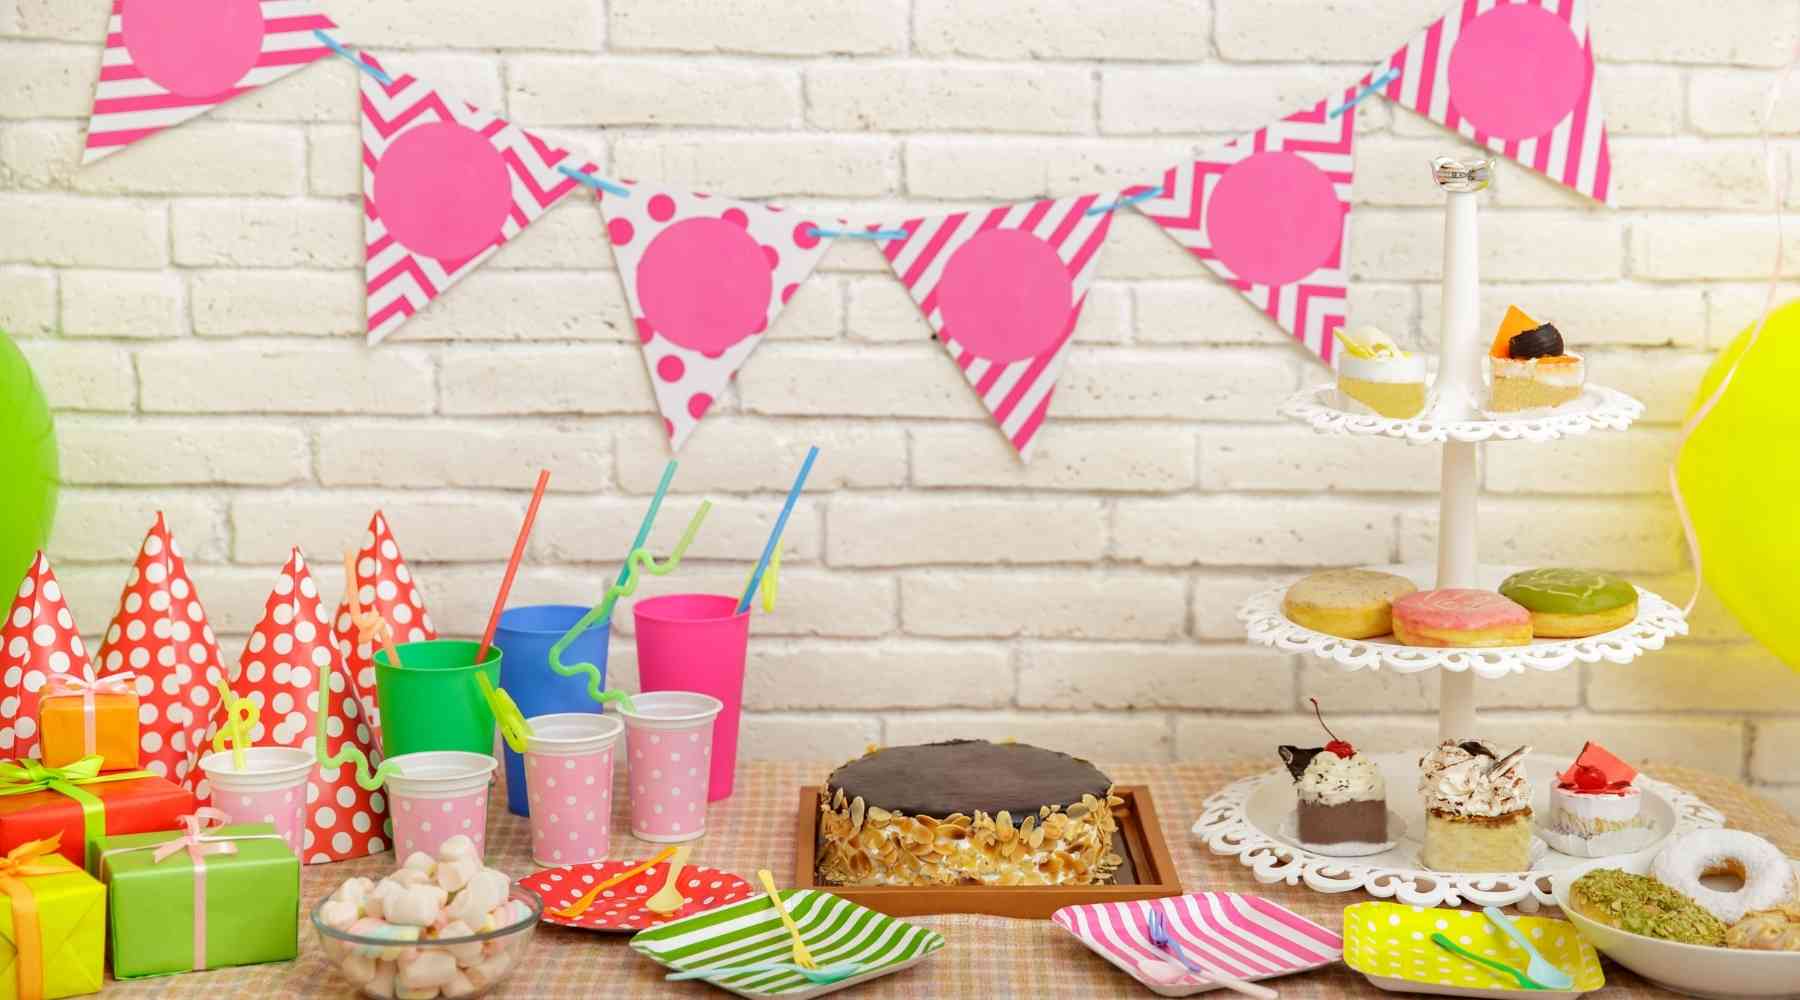 Best Things to Sell on Etsy - Party Supplies